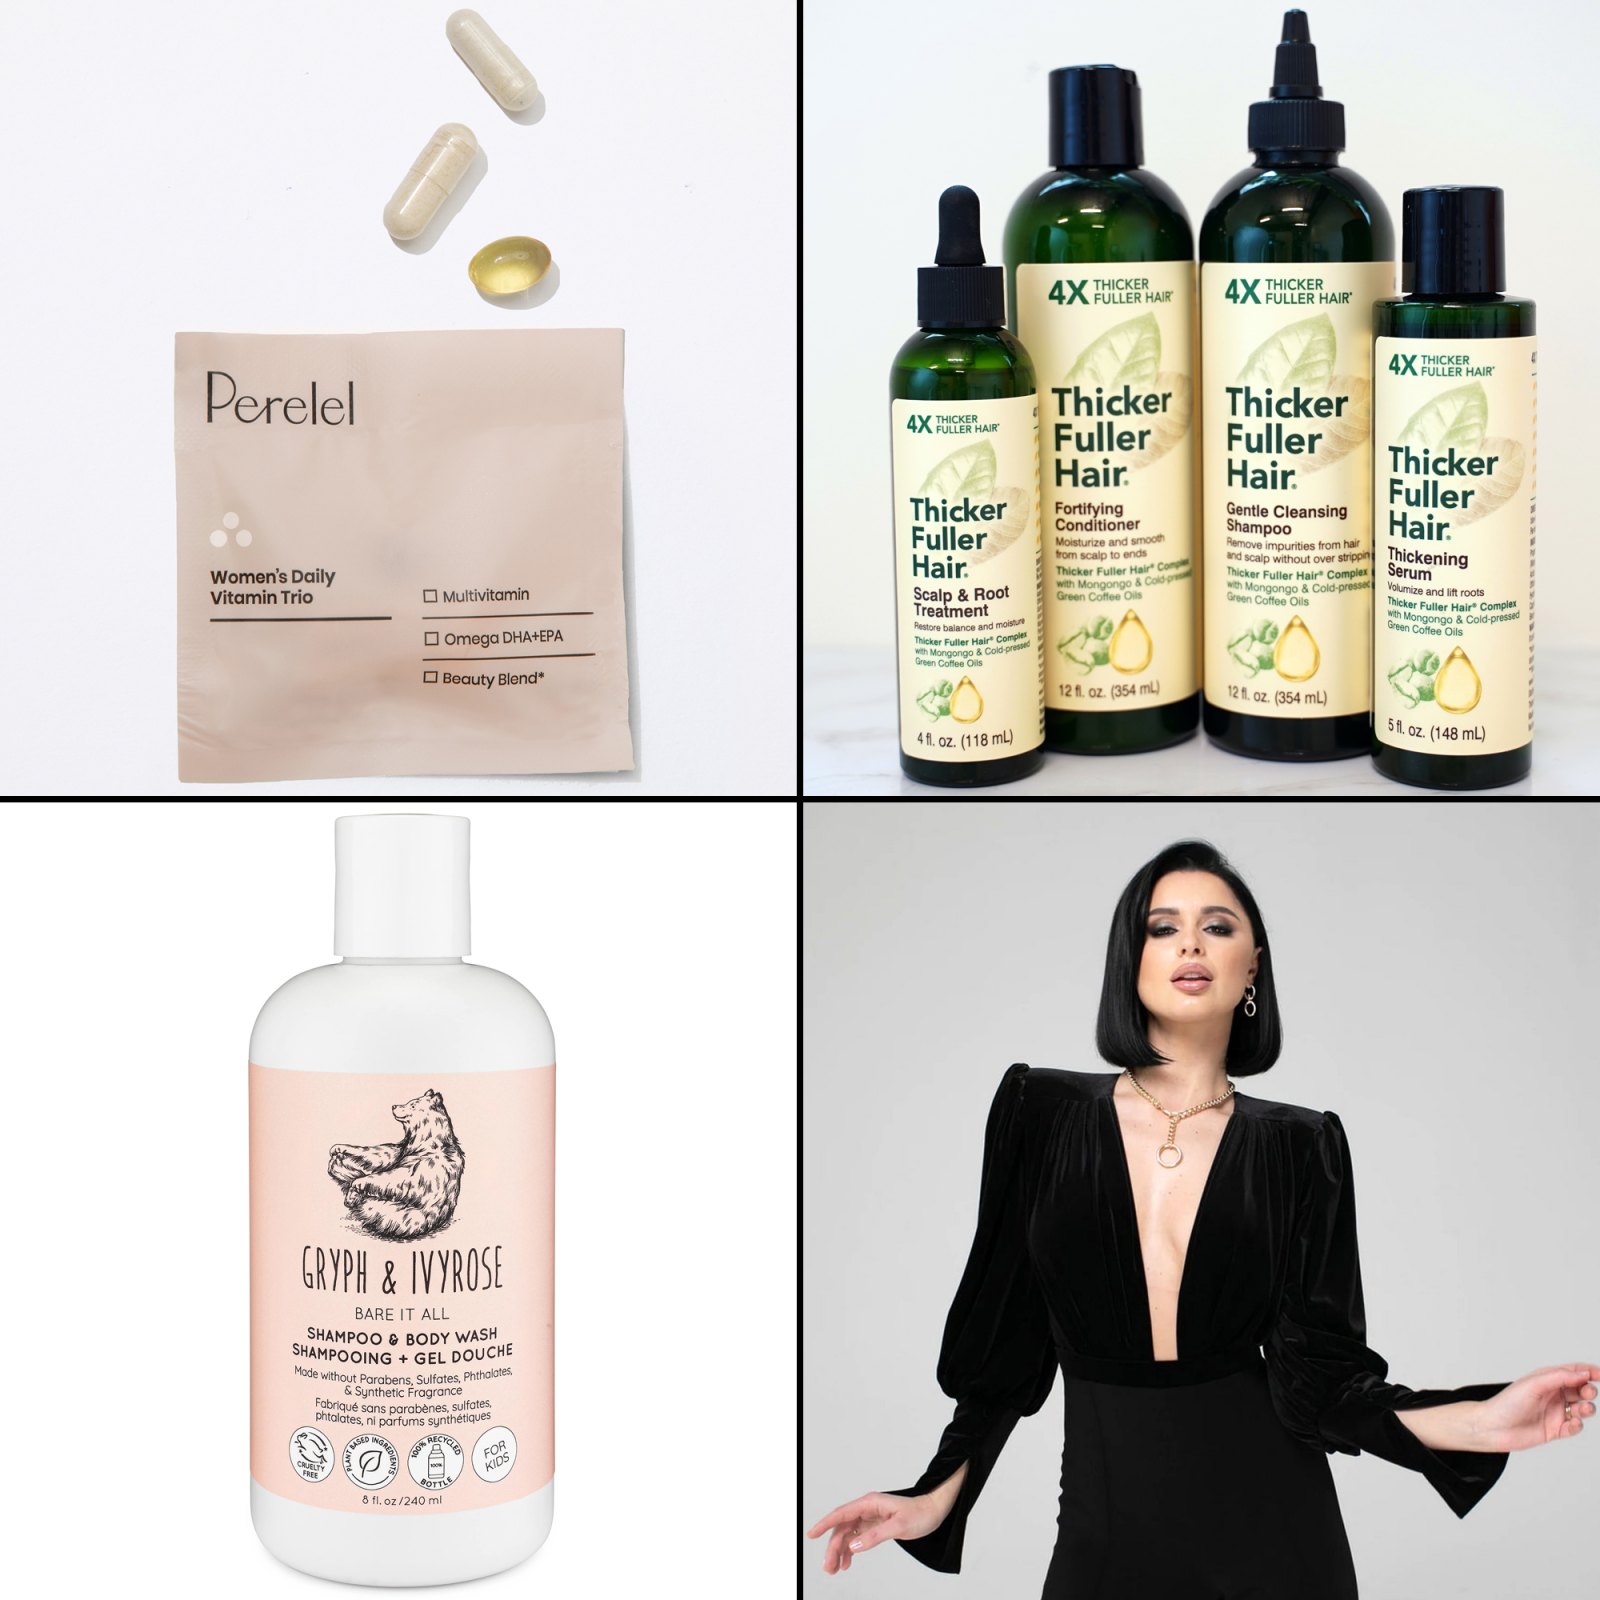 Buzzzz-o-Meter: Perelel's Women's Daily Vitamin Trio, a Shampoo and Body Wash Set and More That Hollywood Is Buzzing About This Week